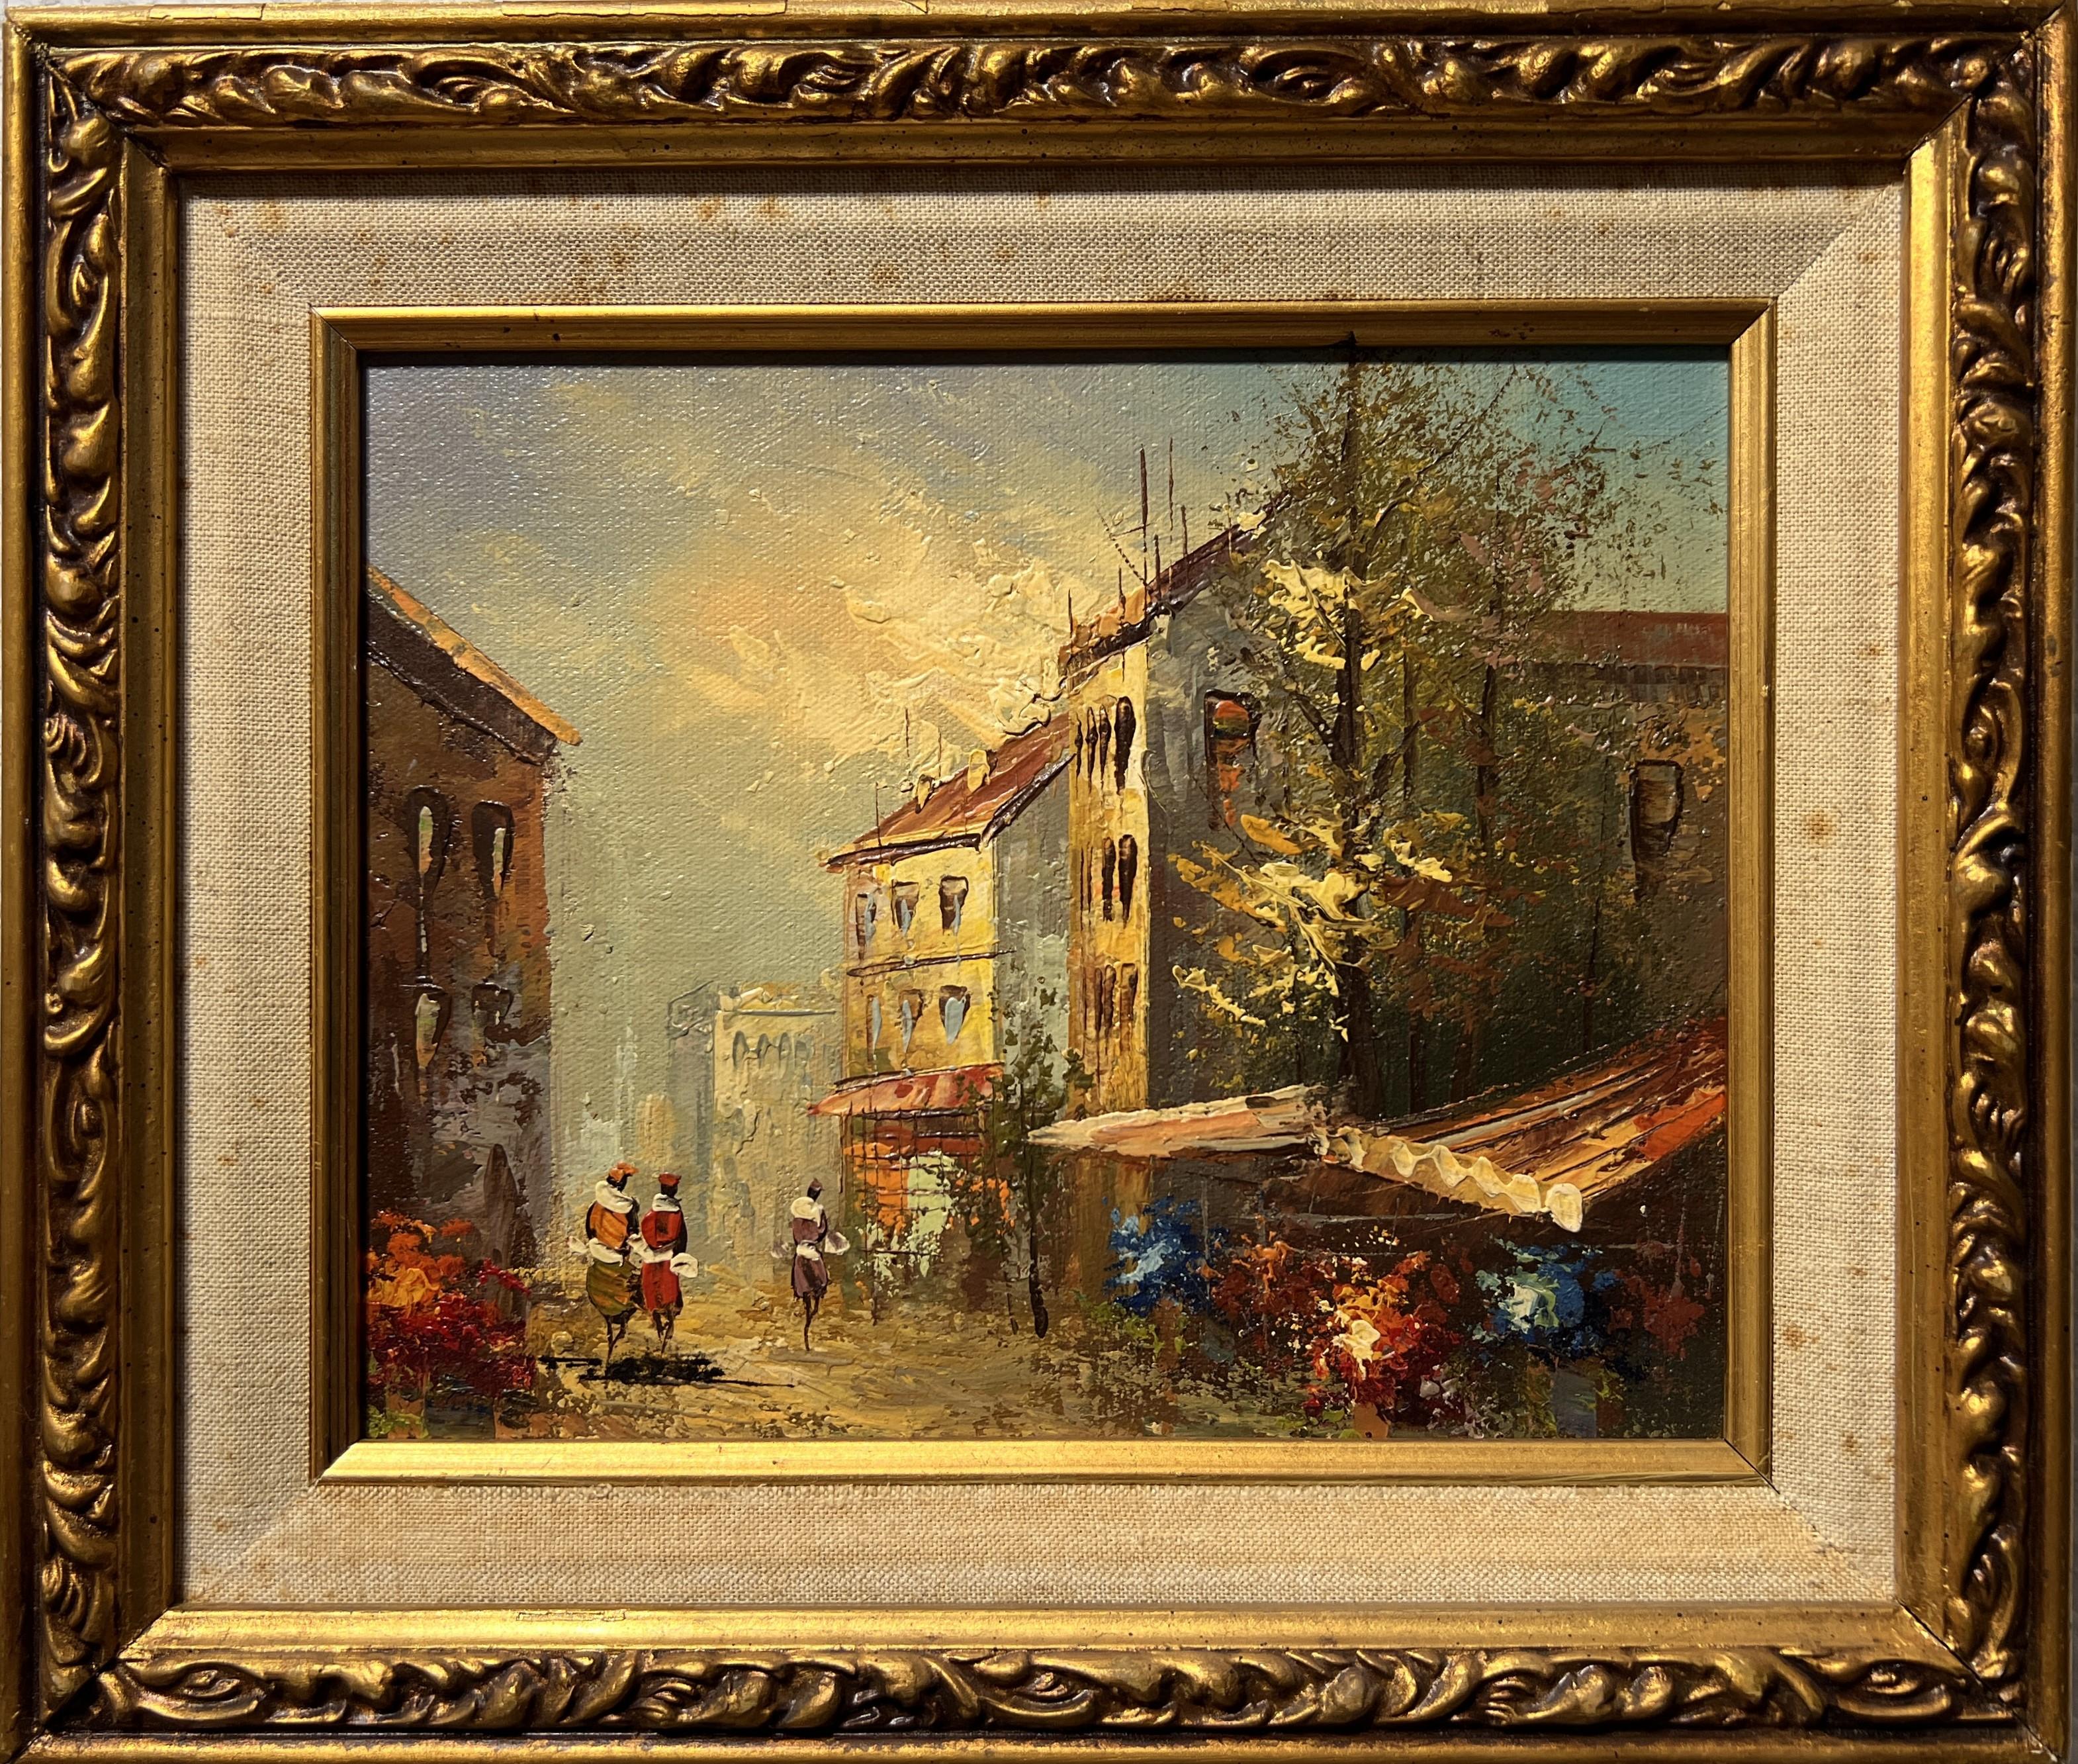 Up For Sale, This Beautiful Original Oil Painting board depicts a Parisian street Scene and market scene. Signed In the Lower left corner By P.G.Tiela.

 Italian artist P.G. Tiela passed away in the 1970s. He's well known for his numerous works of